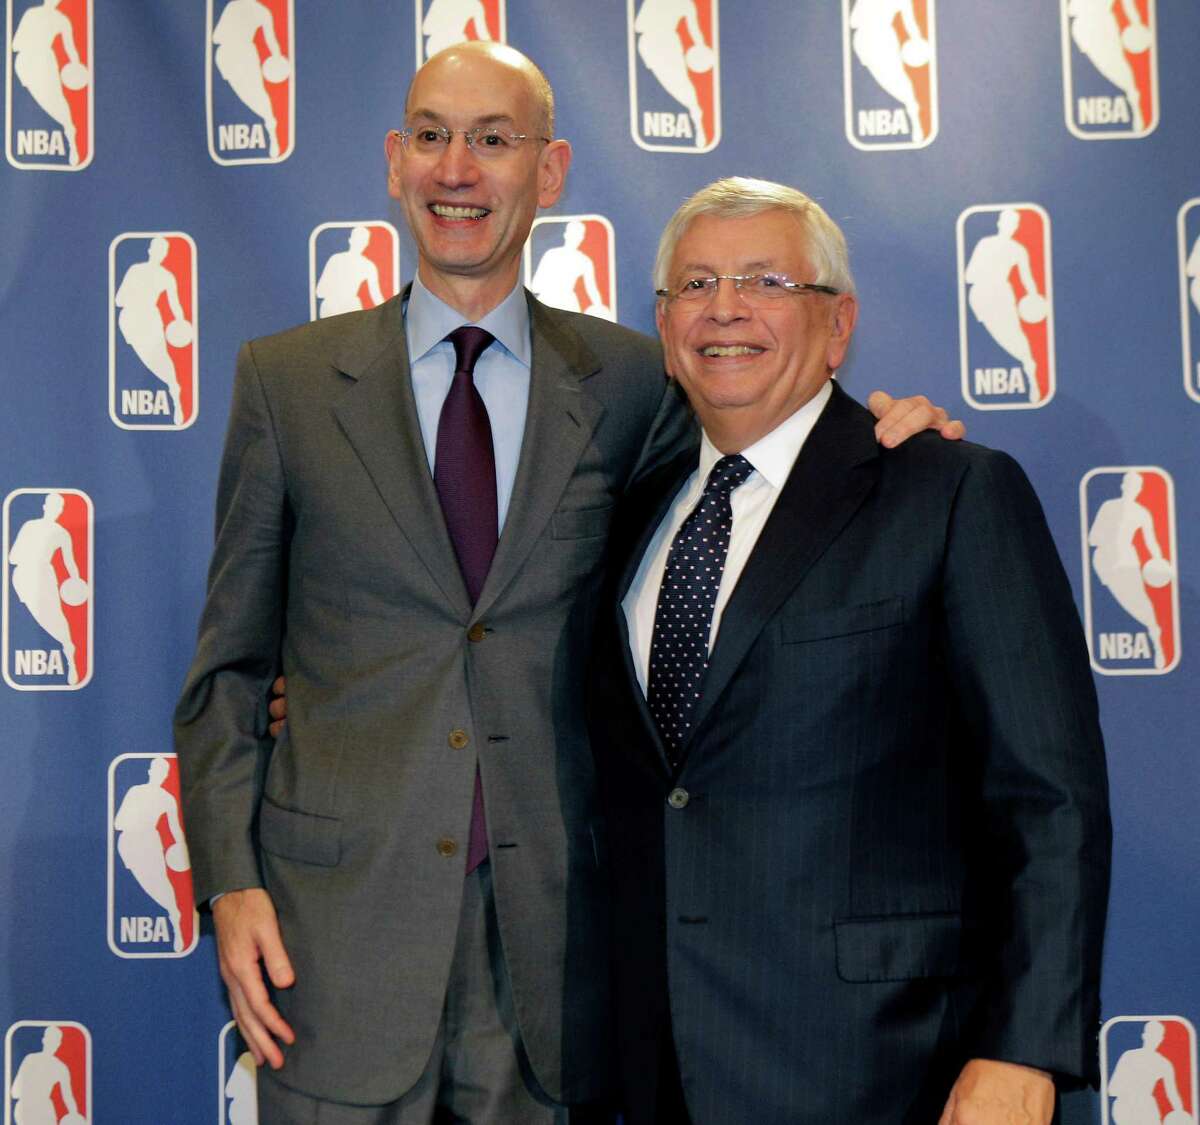 Stern to retire as NBA commissioner